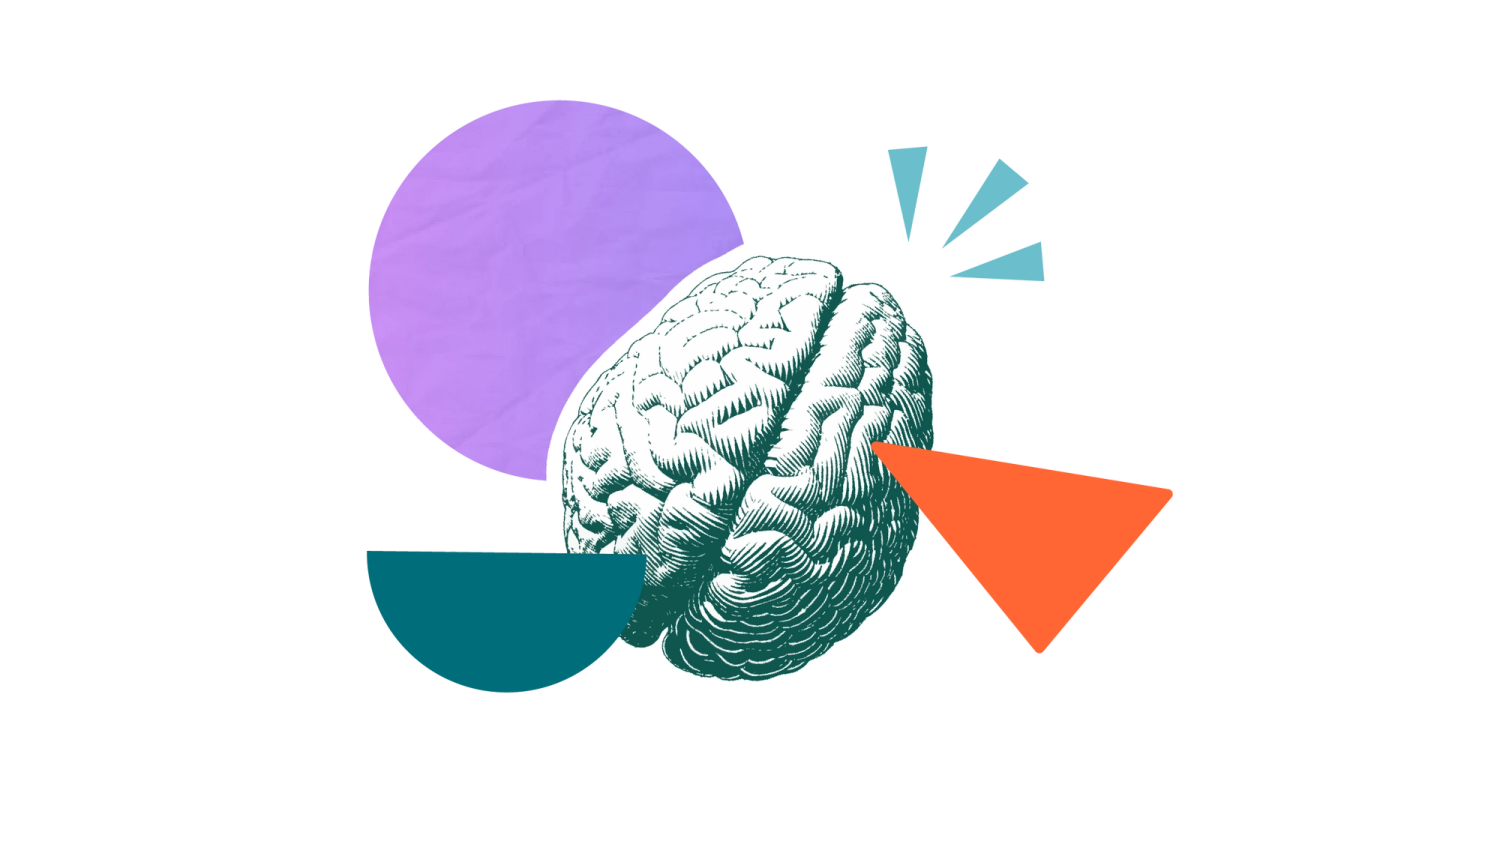 An illustration of a brain to represent a knowledge worker